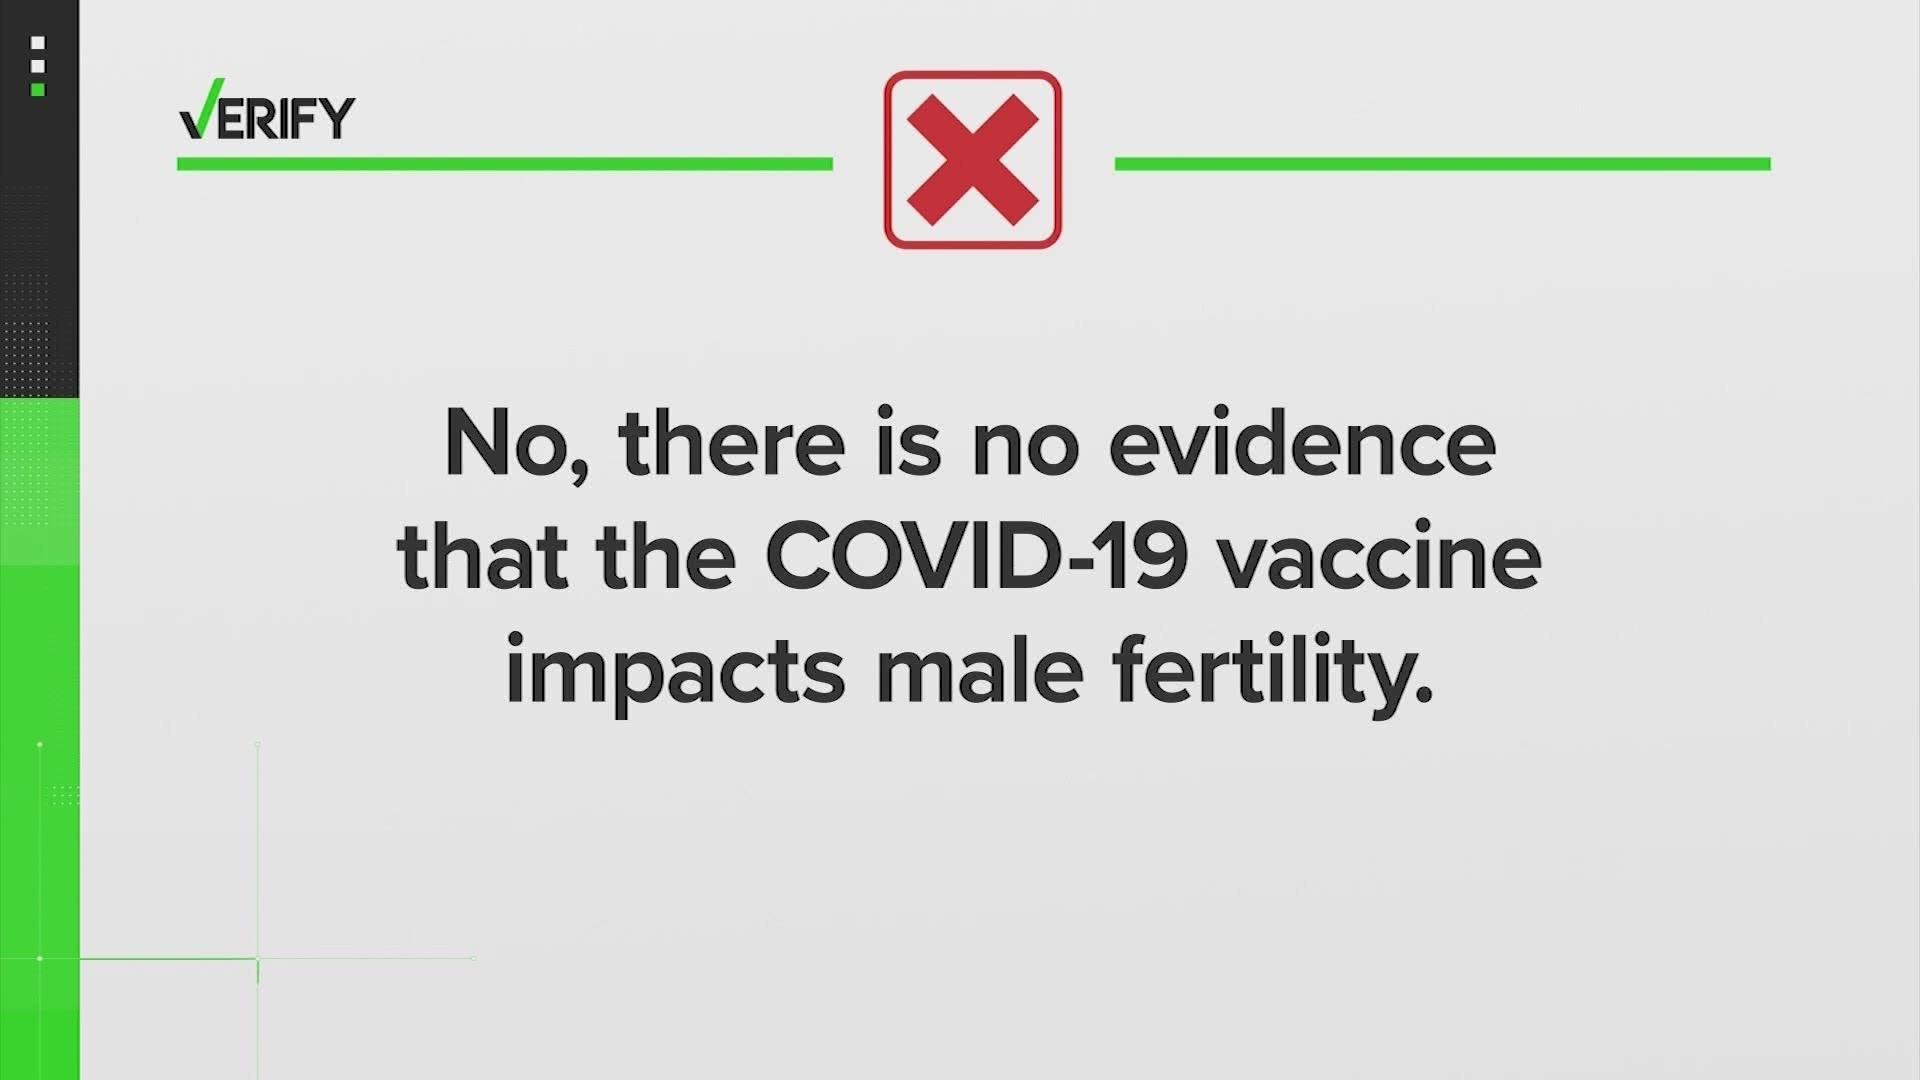 Online users have posted that the COVID-19 vaccine could cause sterility in men, despite a recent study stating there isn’t evidence to support the claims.